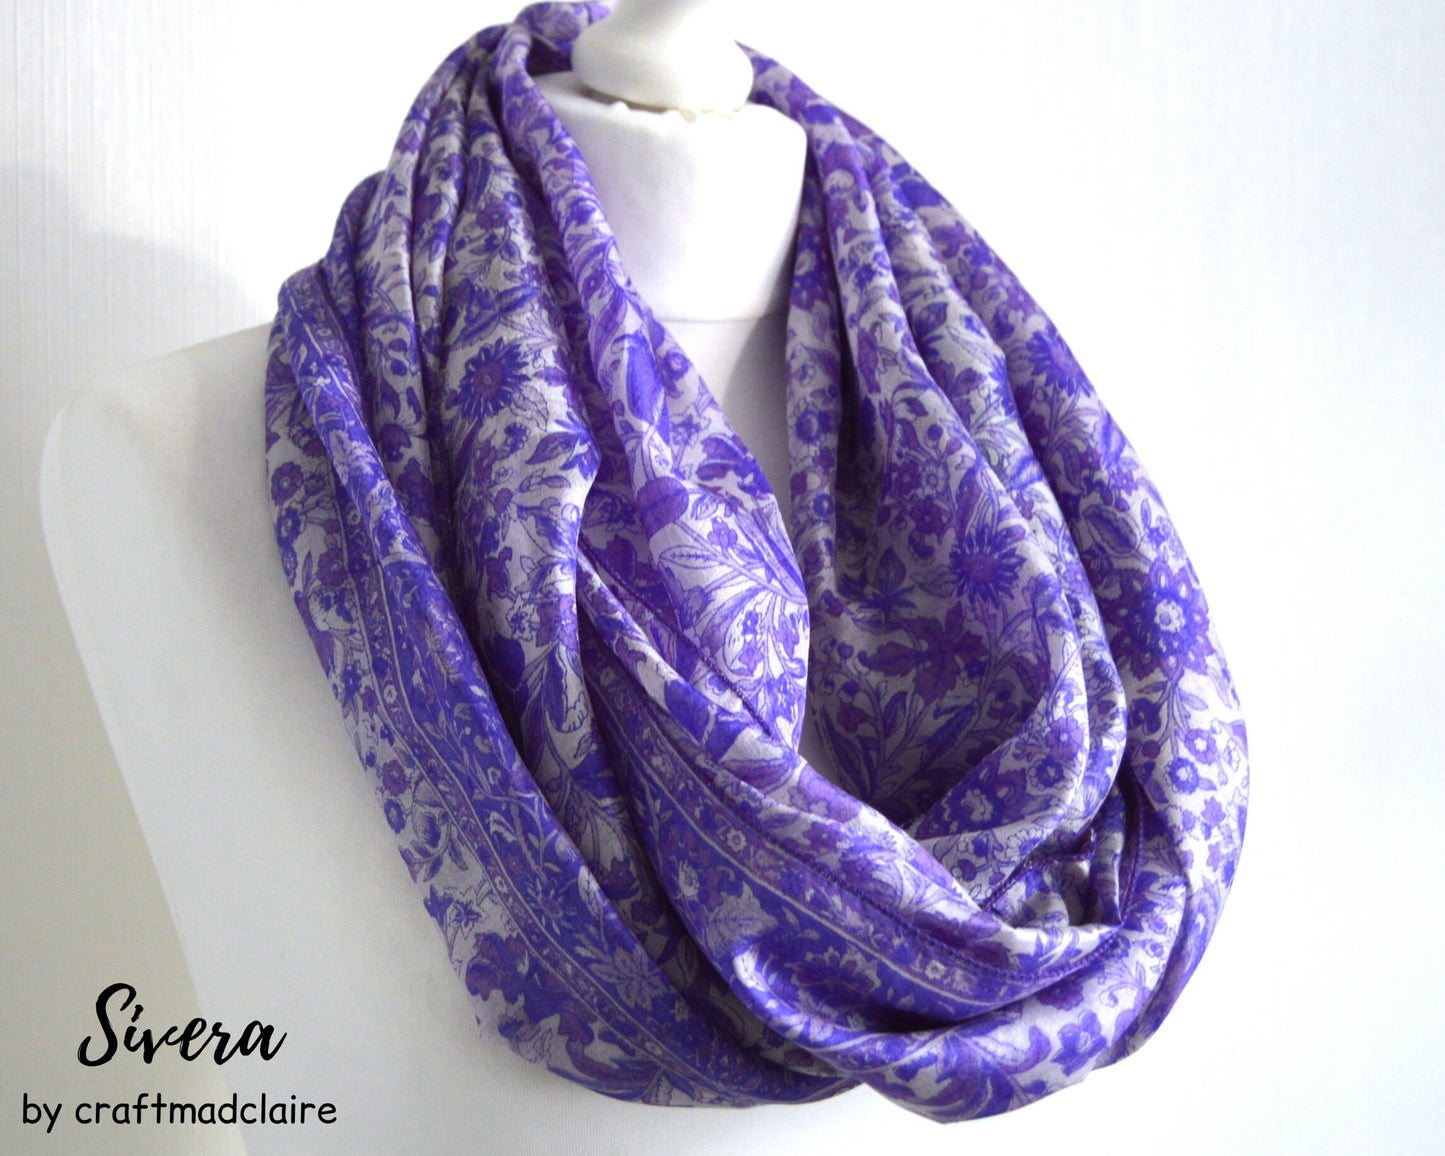 Purple Floral Upcycled Vintage Sari Silk Scarf - Eco Friendly Boho Baby Shower Gift for Her - Ethical Zero Waste Womens Scarf